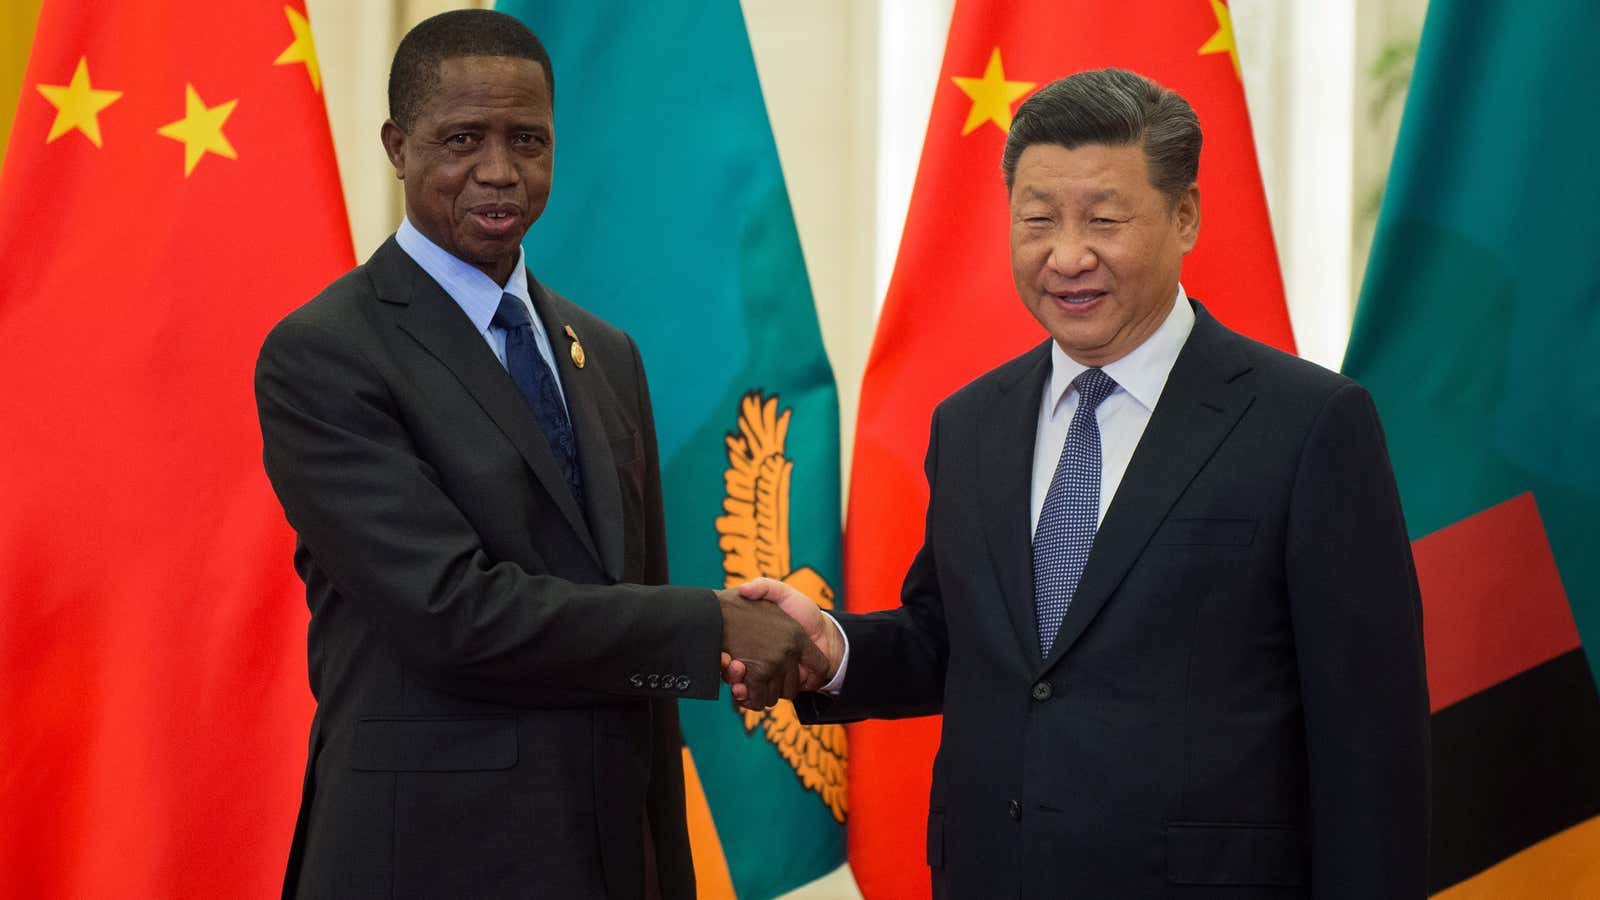 Zambia’s President Edgar Lungu shakes hands with China’s President Xi Jinping  in Beijing